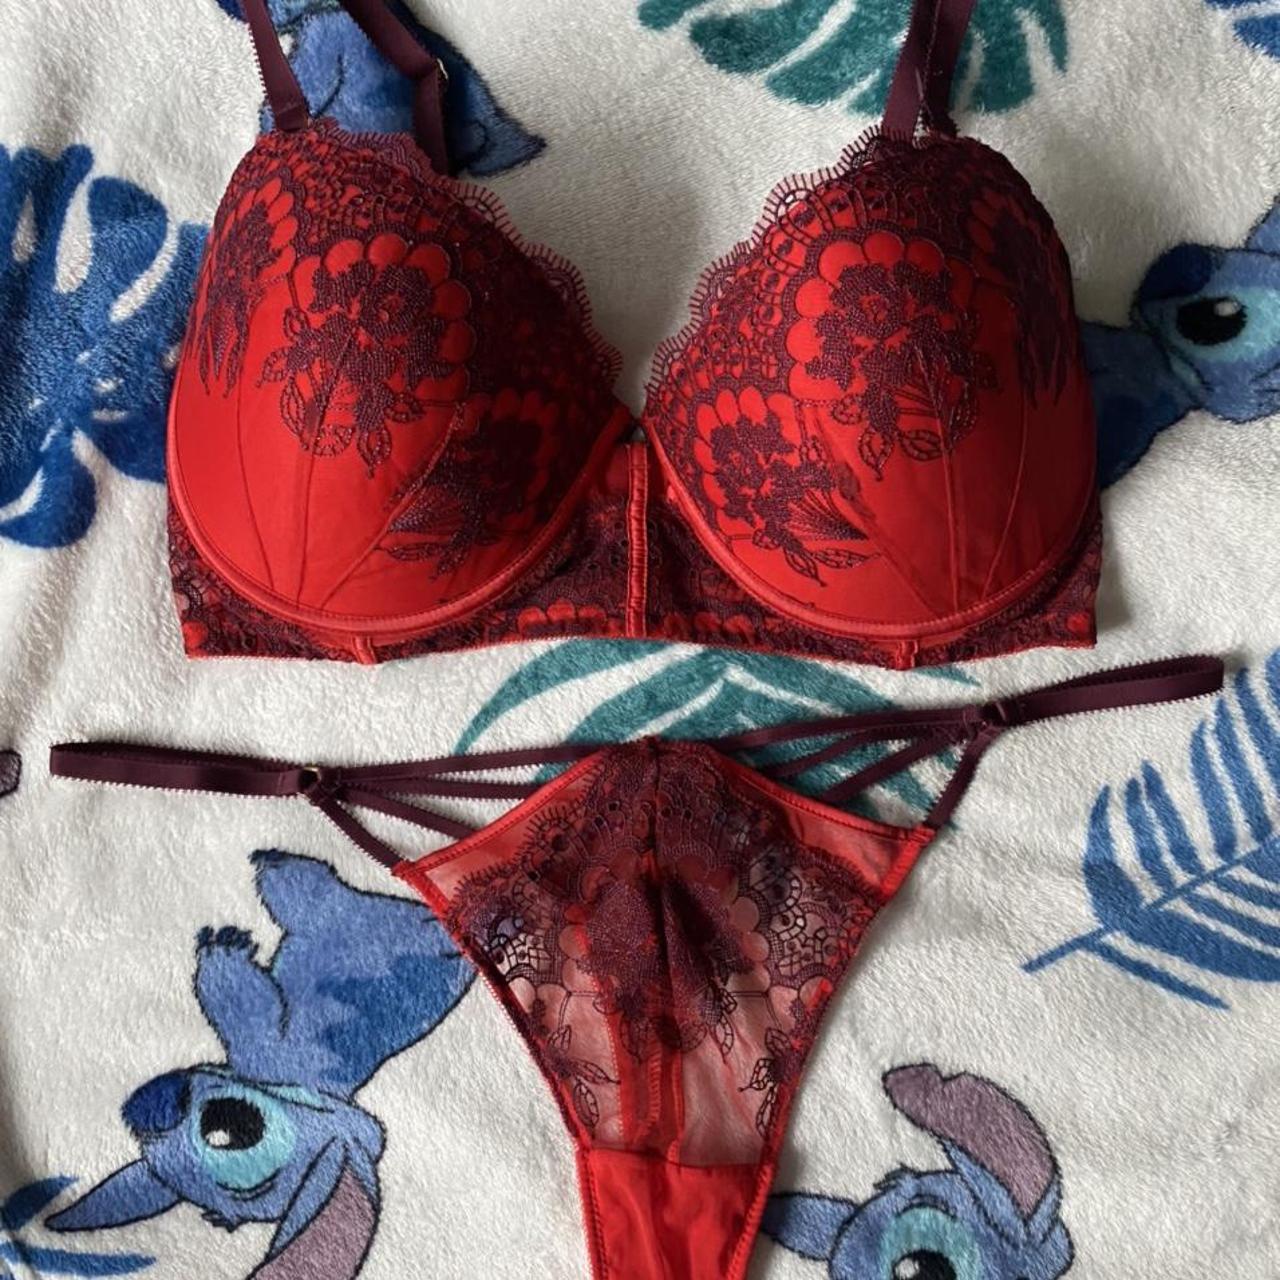 Red and maroon embroidered Lingerie set by